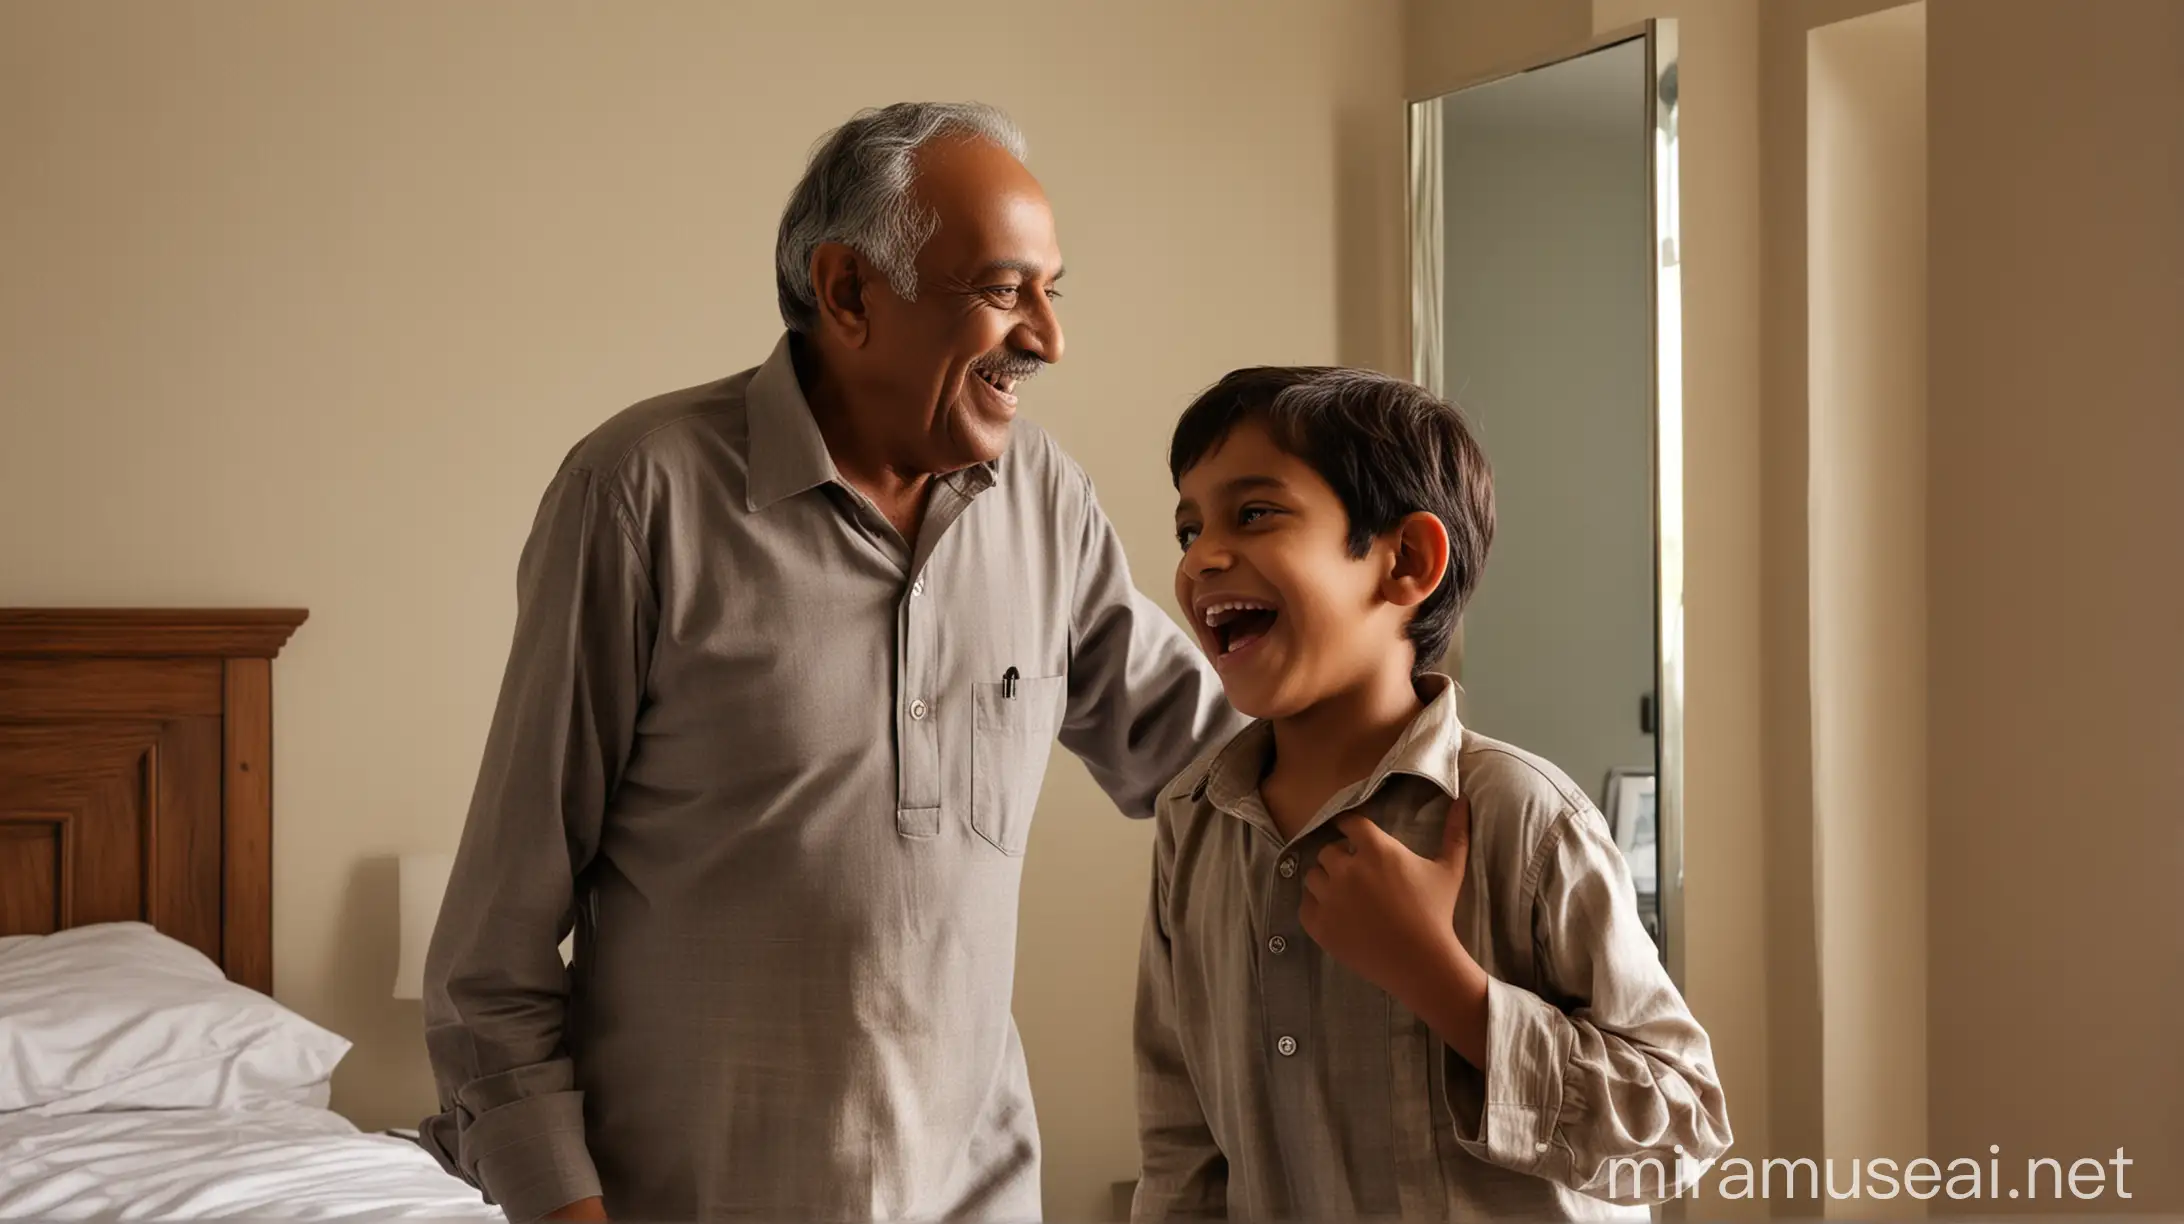 an interior shot, 60-year-old indian grandfather with 10-year-old child both looking at the bedroom mirror, laughing, award winning photographer, photorealistic